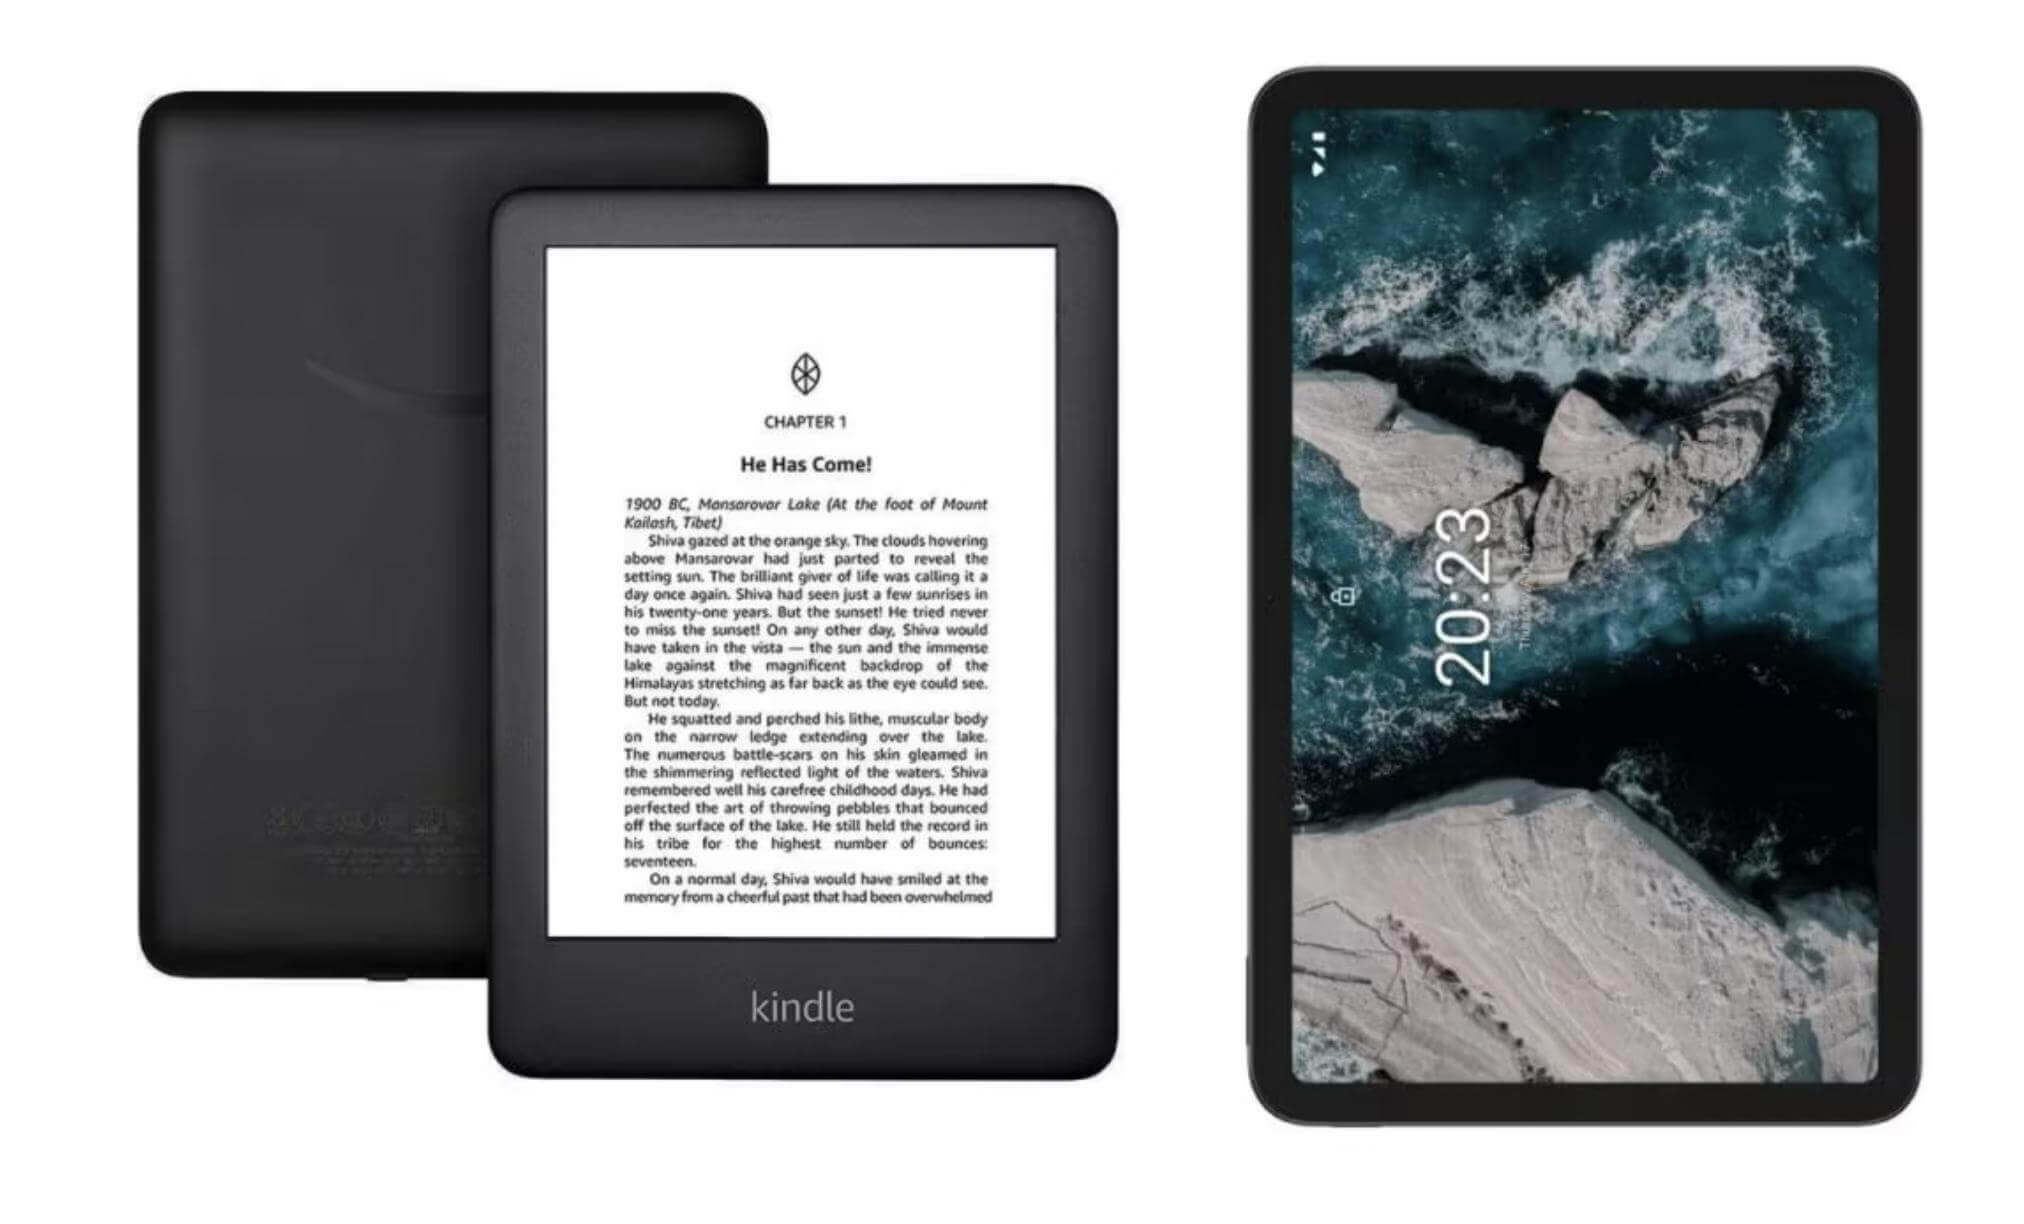 Kindle – The lightest and most compact Kindle, with extended battery  life, adjustable front light, and 16 GB storage – Black